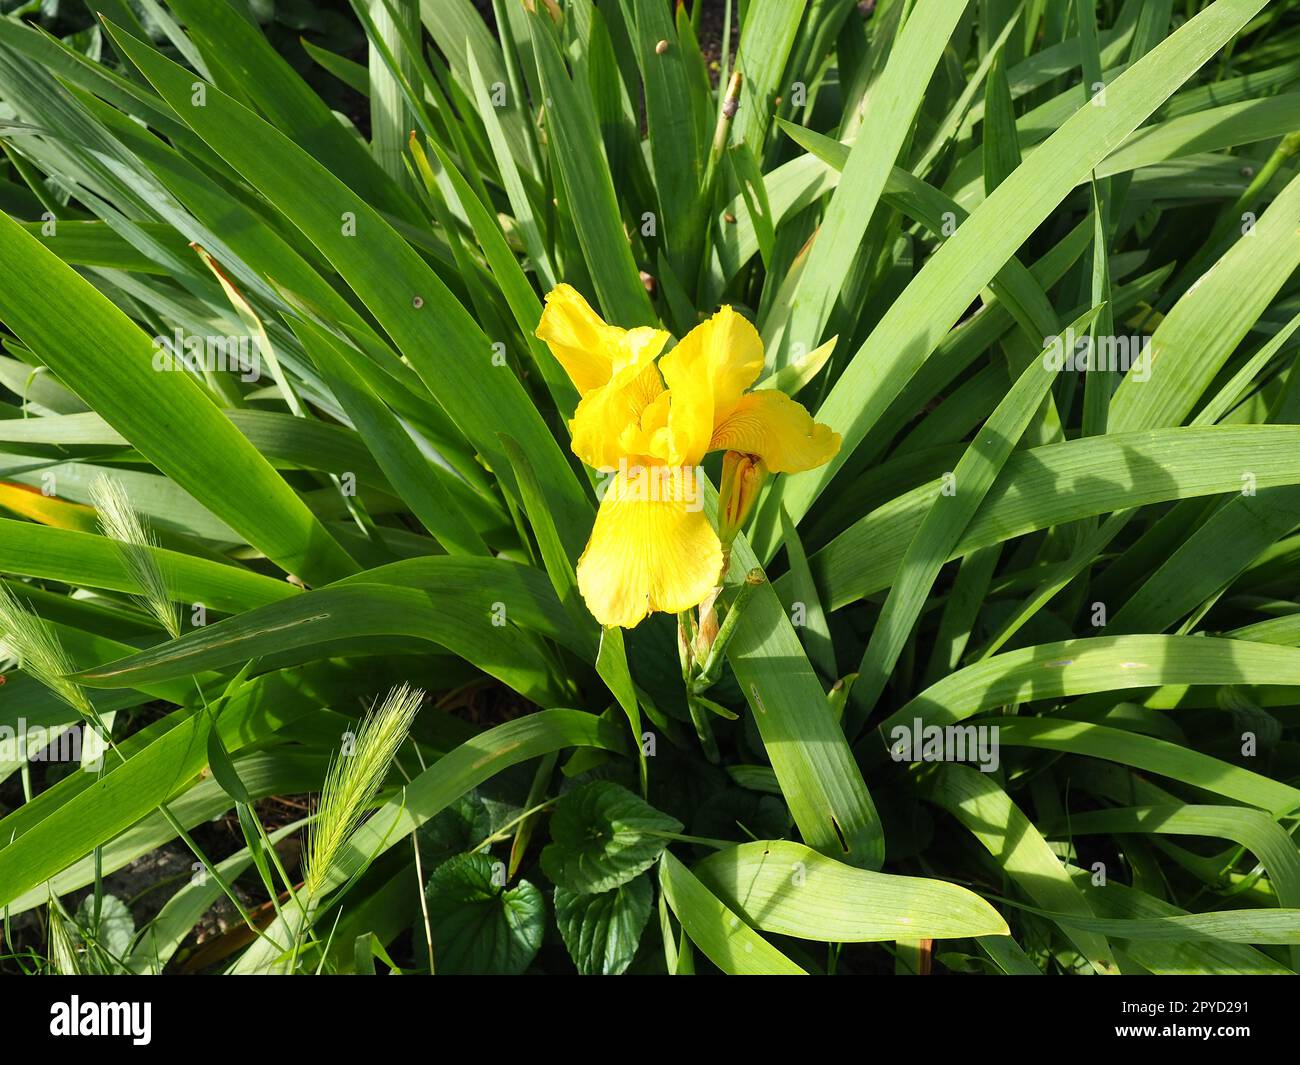 Iris, a genus of perennial rhizome plants of the Iris family. An ornamental herb with large bright flowers. Graceful delicate flower of yellow color with orange veins. Green leaves in the background Stock Photo